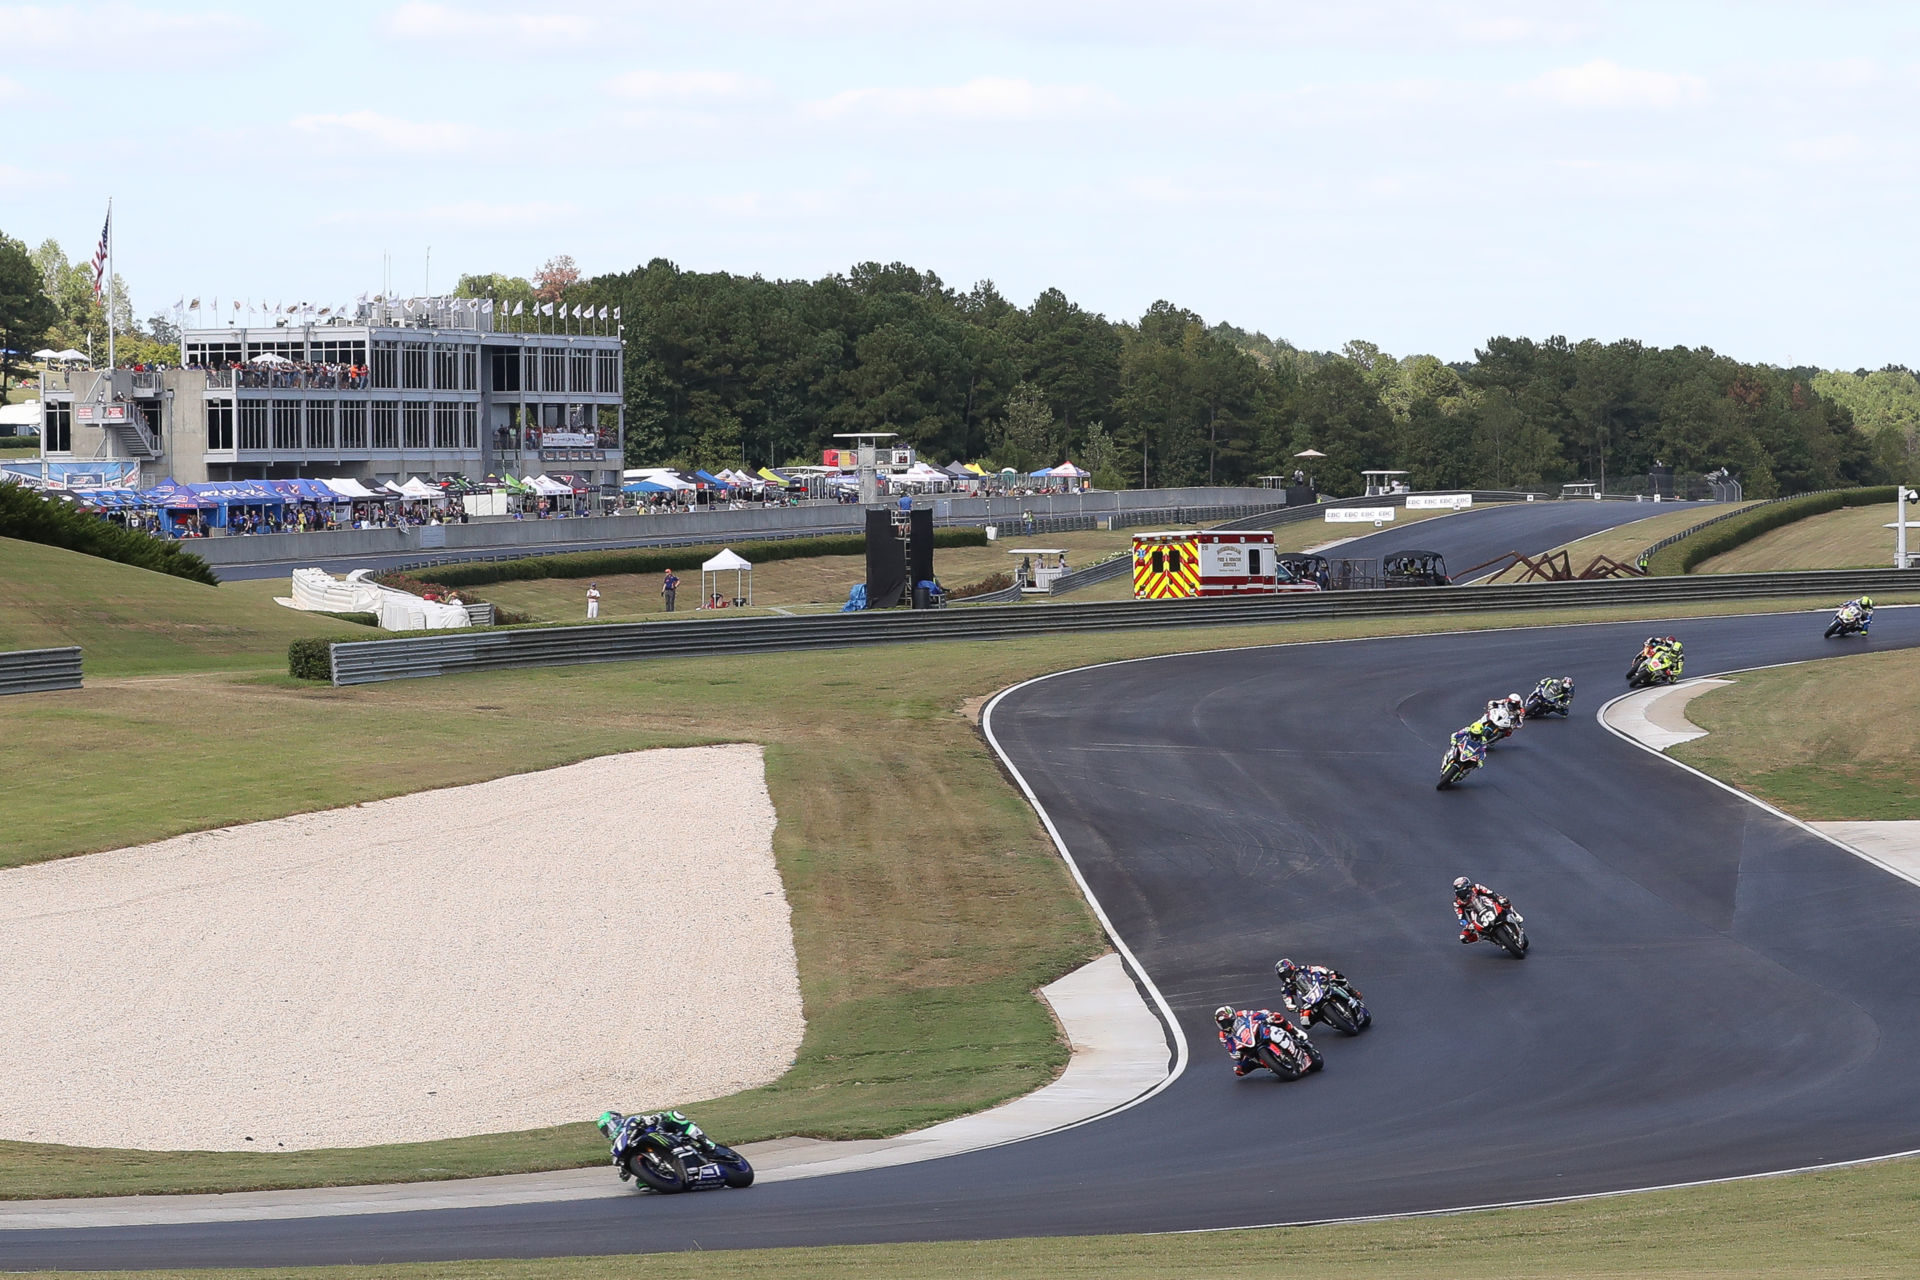 The start of a MotoAmerica Superbike race at the season finale at Barber Motorsports Park. Photo by Brian J. Nelson.